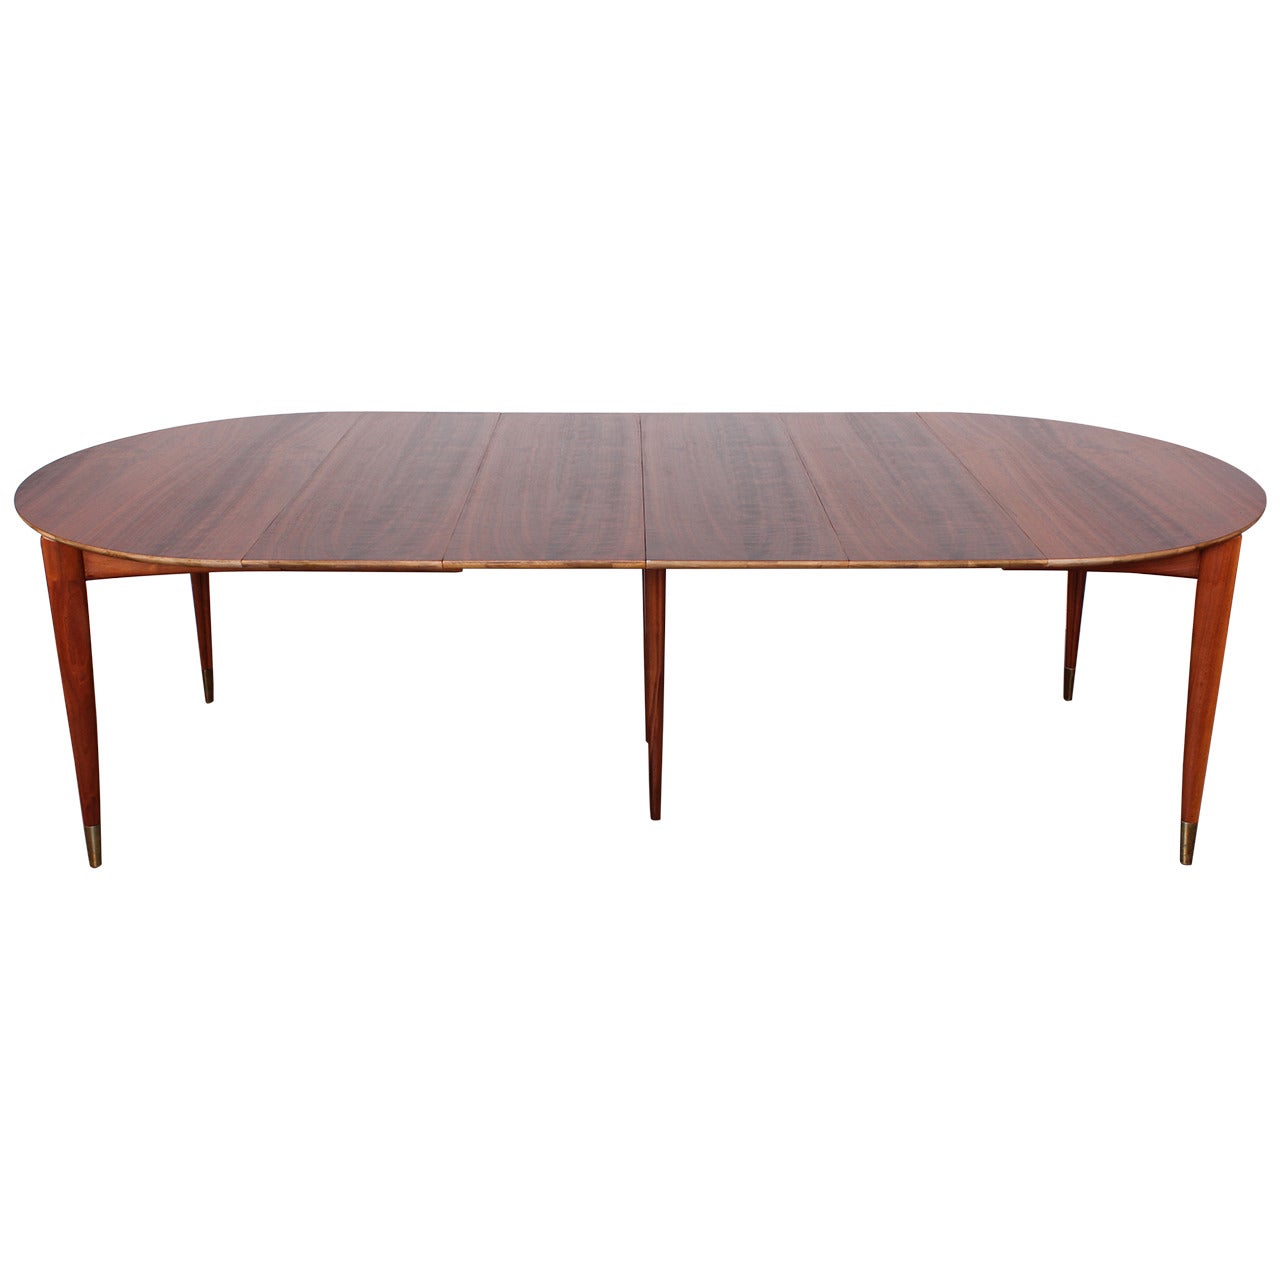 Dining Table by Gio Ponti for M. Singer & Sons